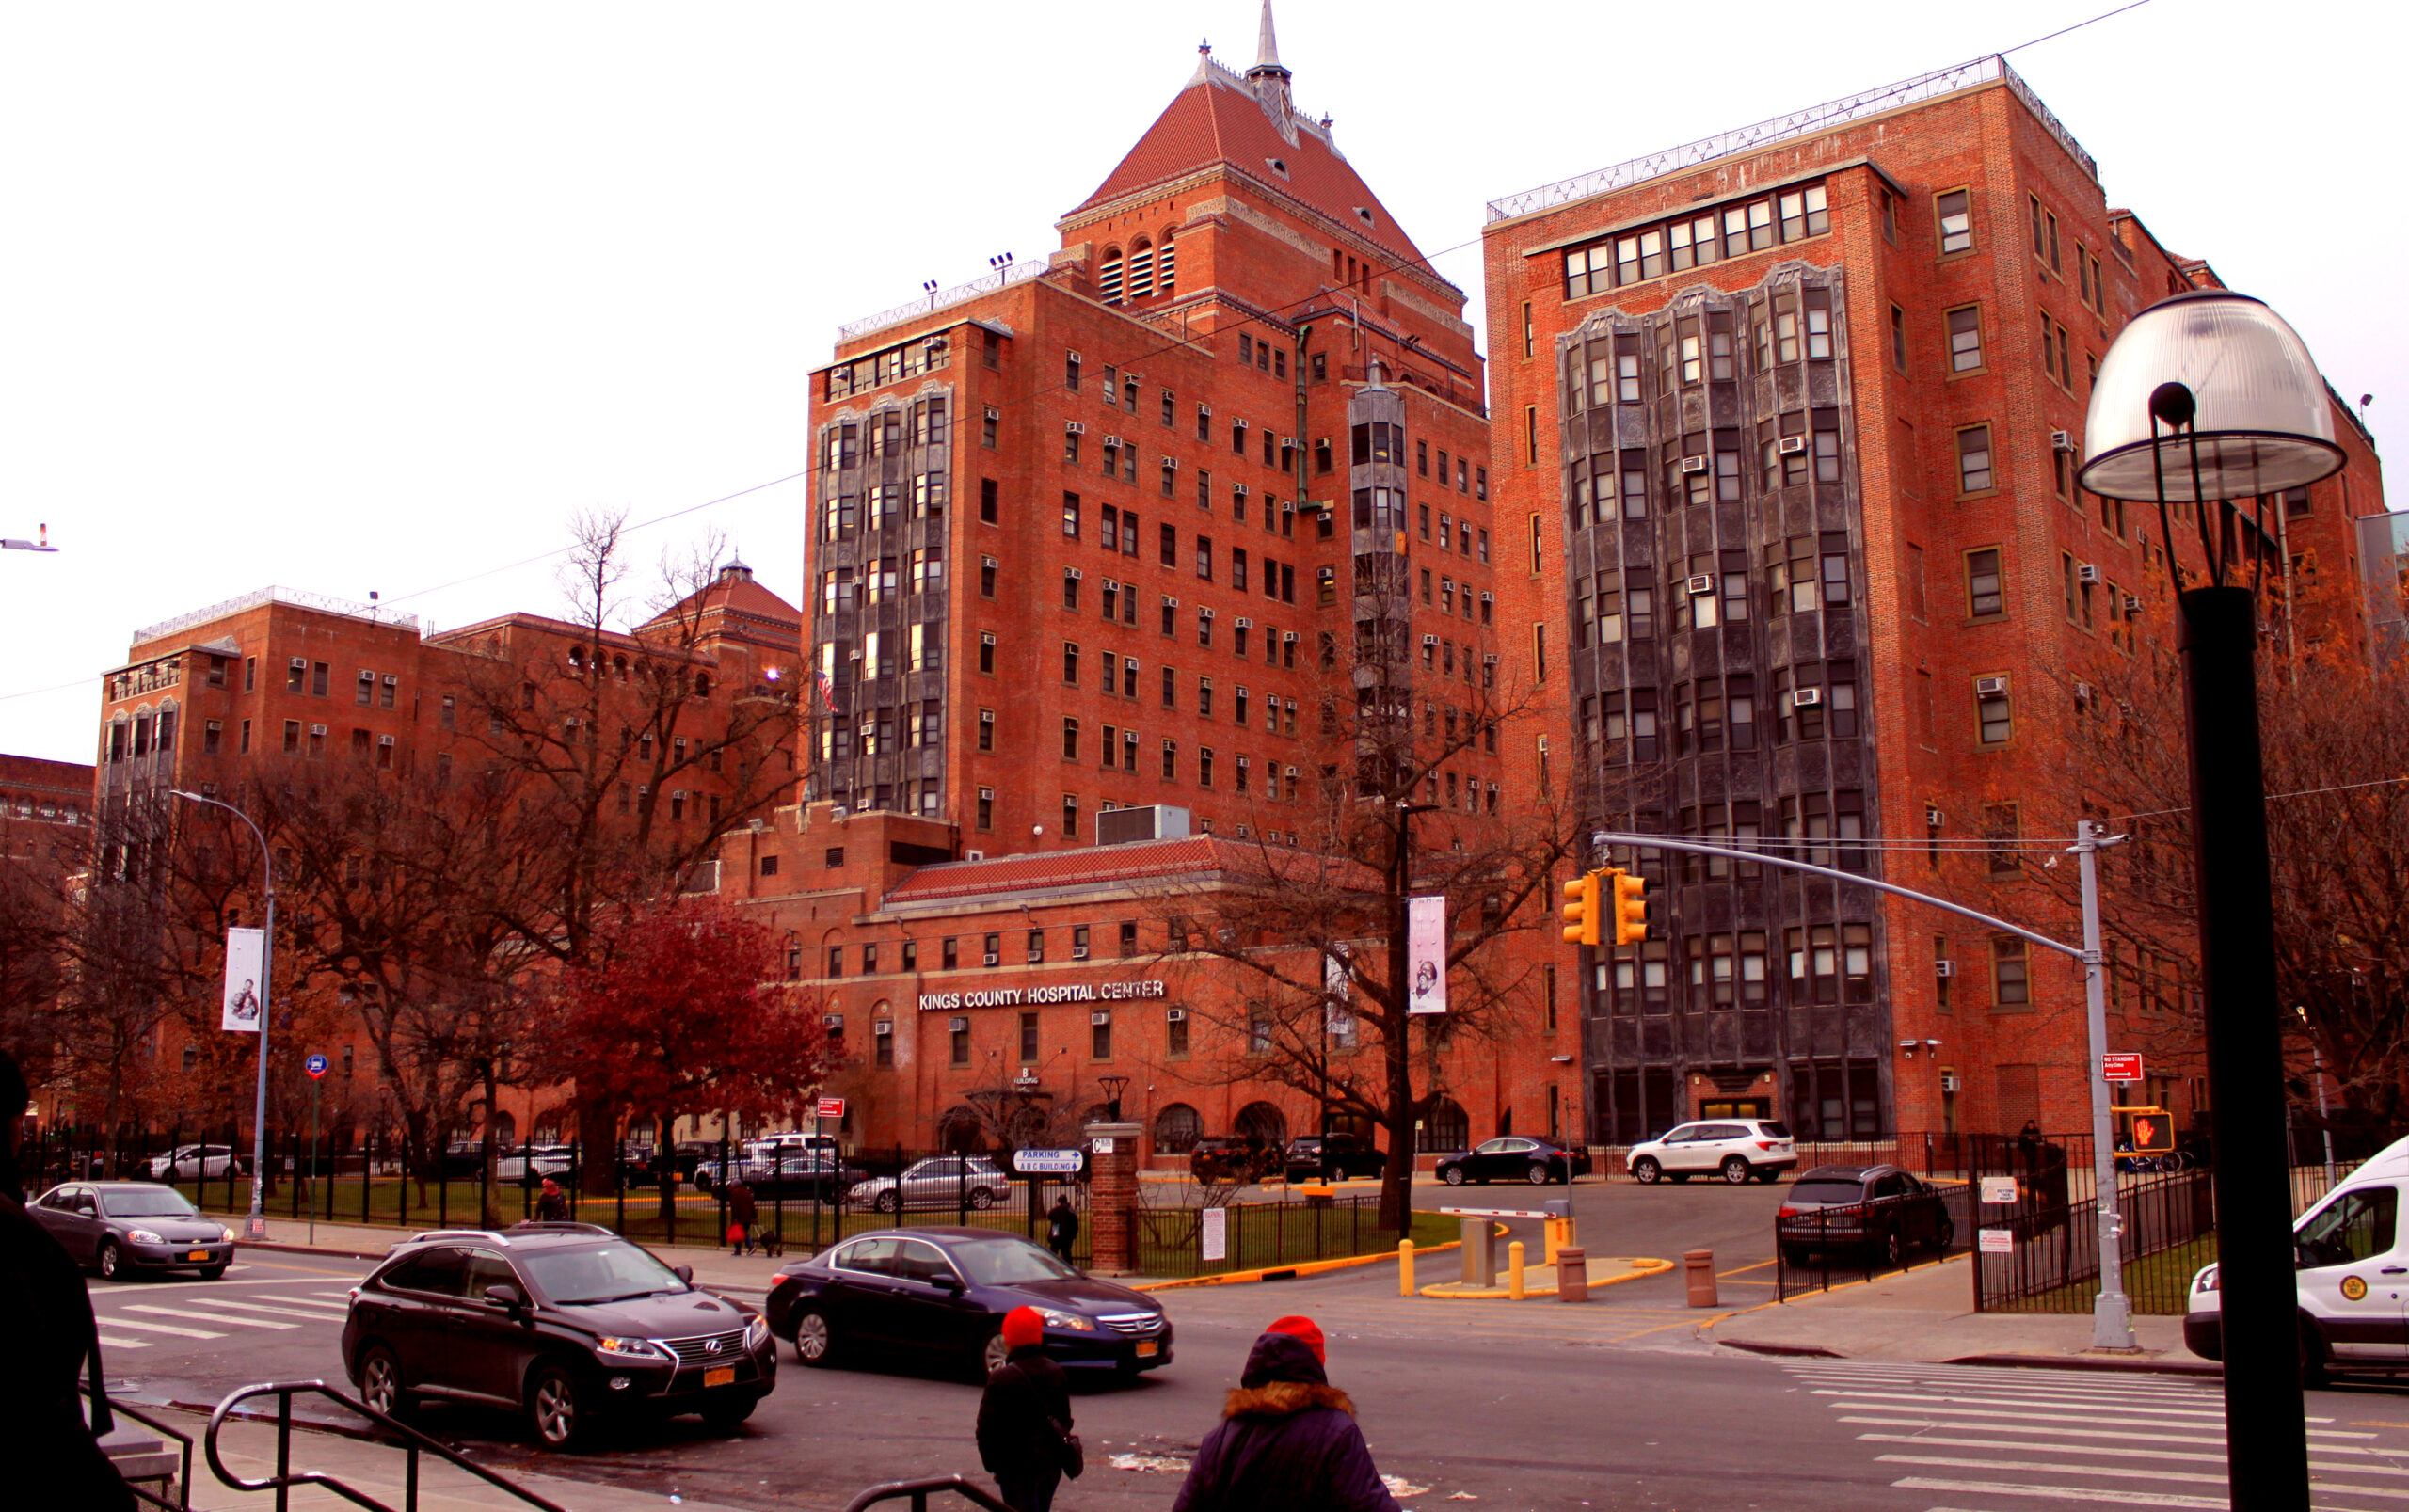 Brownstone hospital street view with 'Kings County Hospital Center' written in white letters on the front of the building